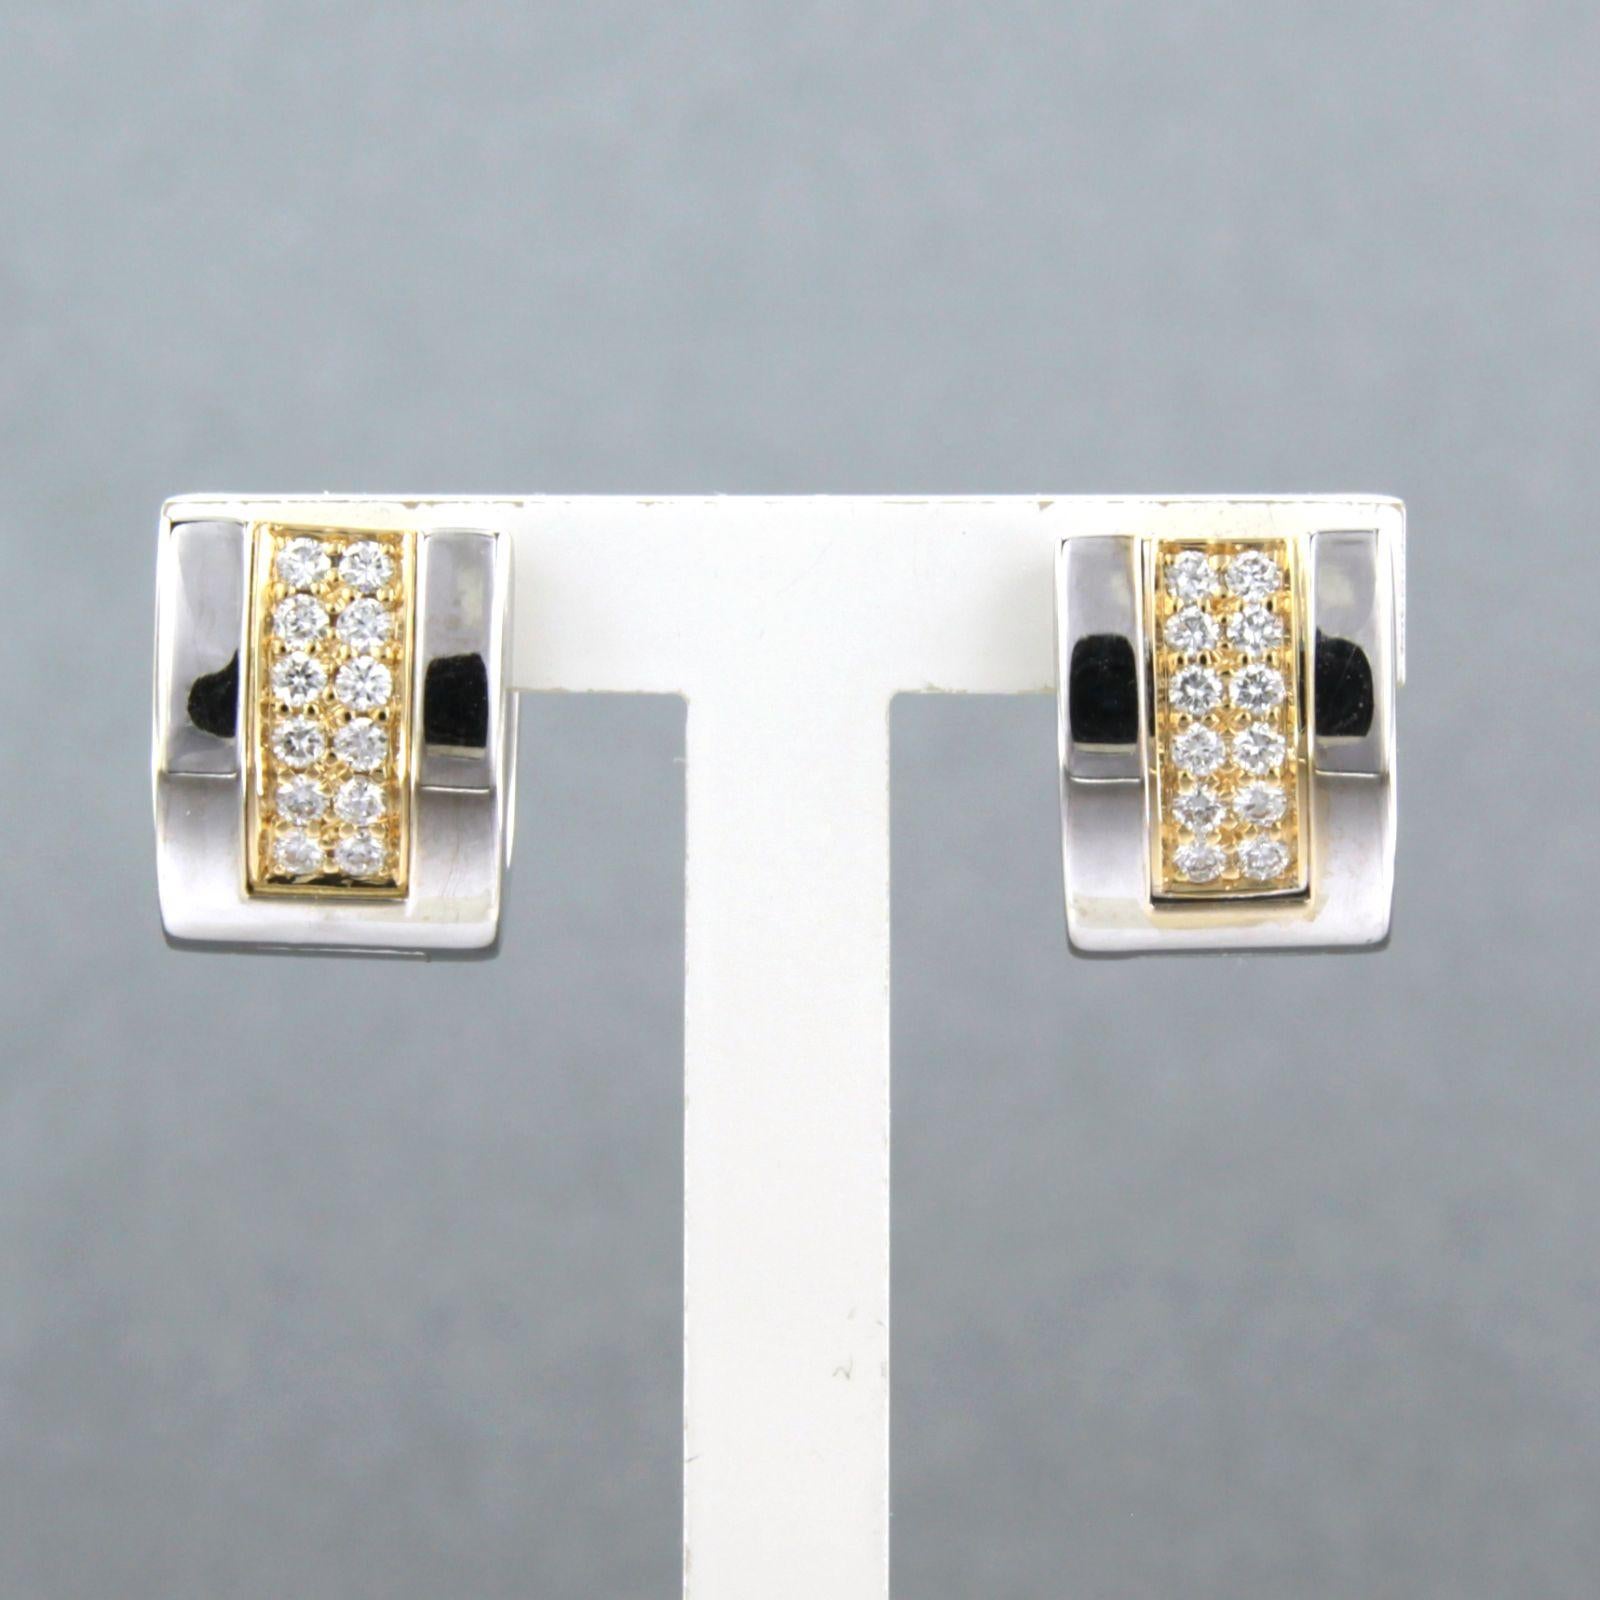 LECHIC - 18k bicolour gold ear clips set with brilliant cut diamonds up to. 0.24ct - F/G - VS/SI

detailed description:

the size of the ear clip is 1.0 cm long by 8.0 mm wide

weight 6.6 grams

occupied with

- 24 x 1.3 mm brilliant cut diamond,